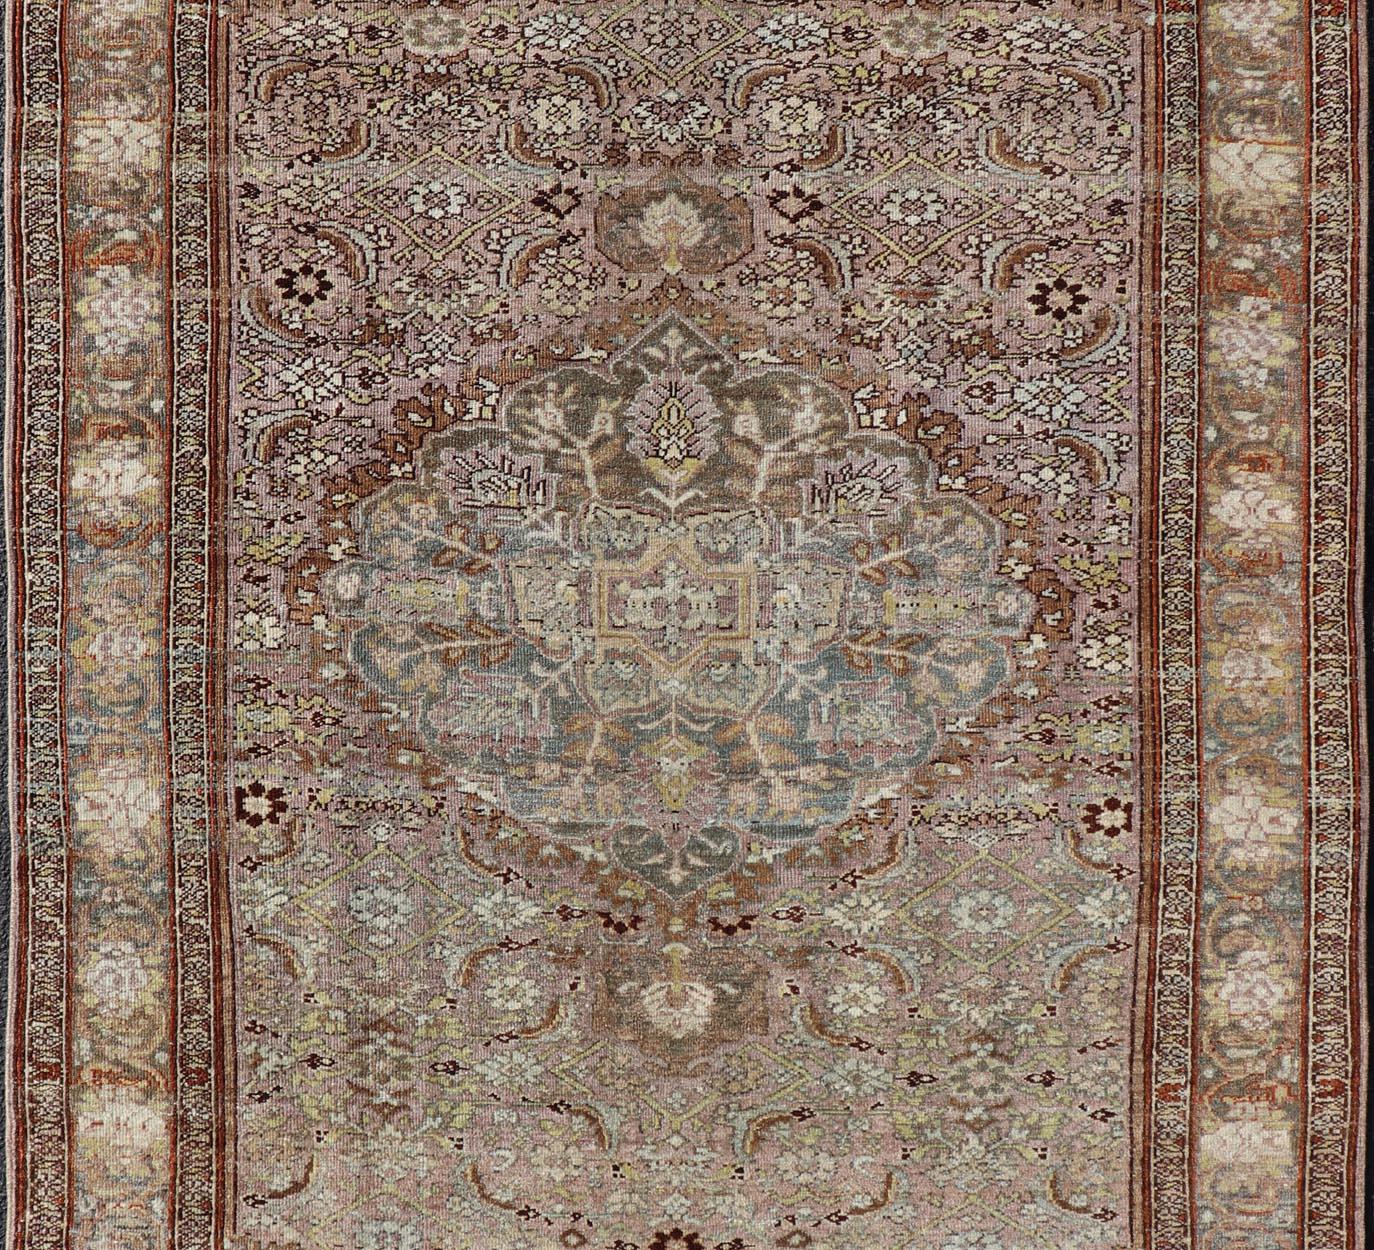 Antique Persian Bidjar Rug with Floral Medallion and All-Over Vining Floral In Good Condition For Sale In Atlanta, GA